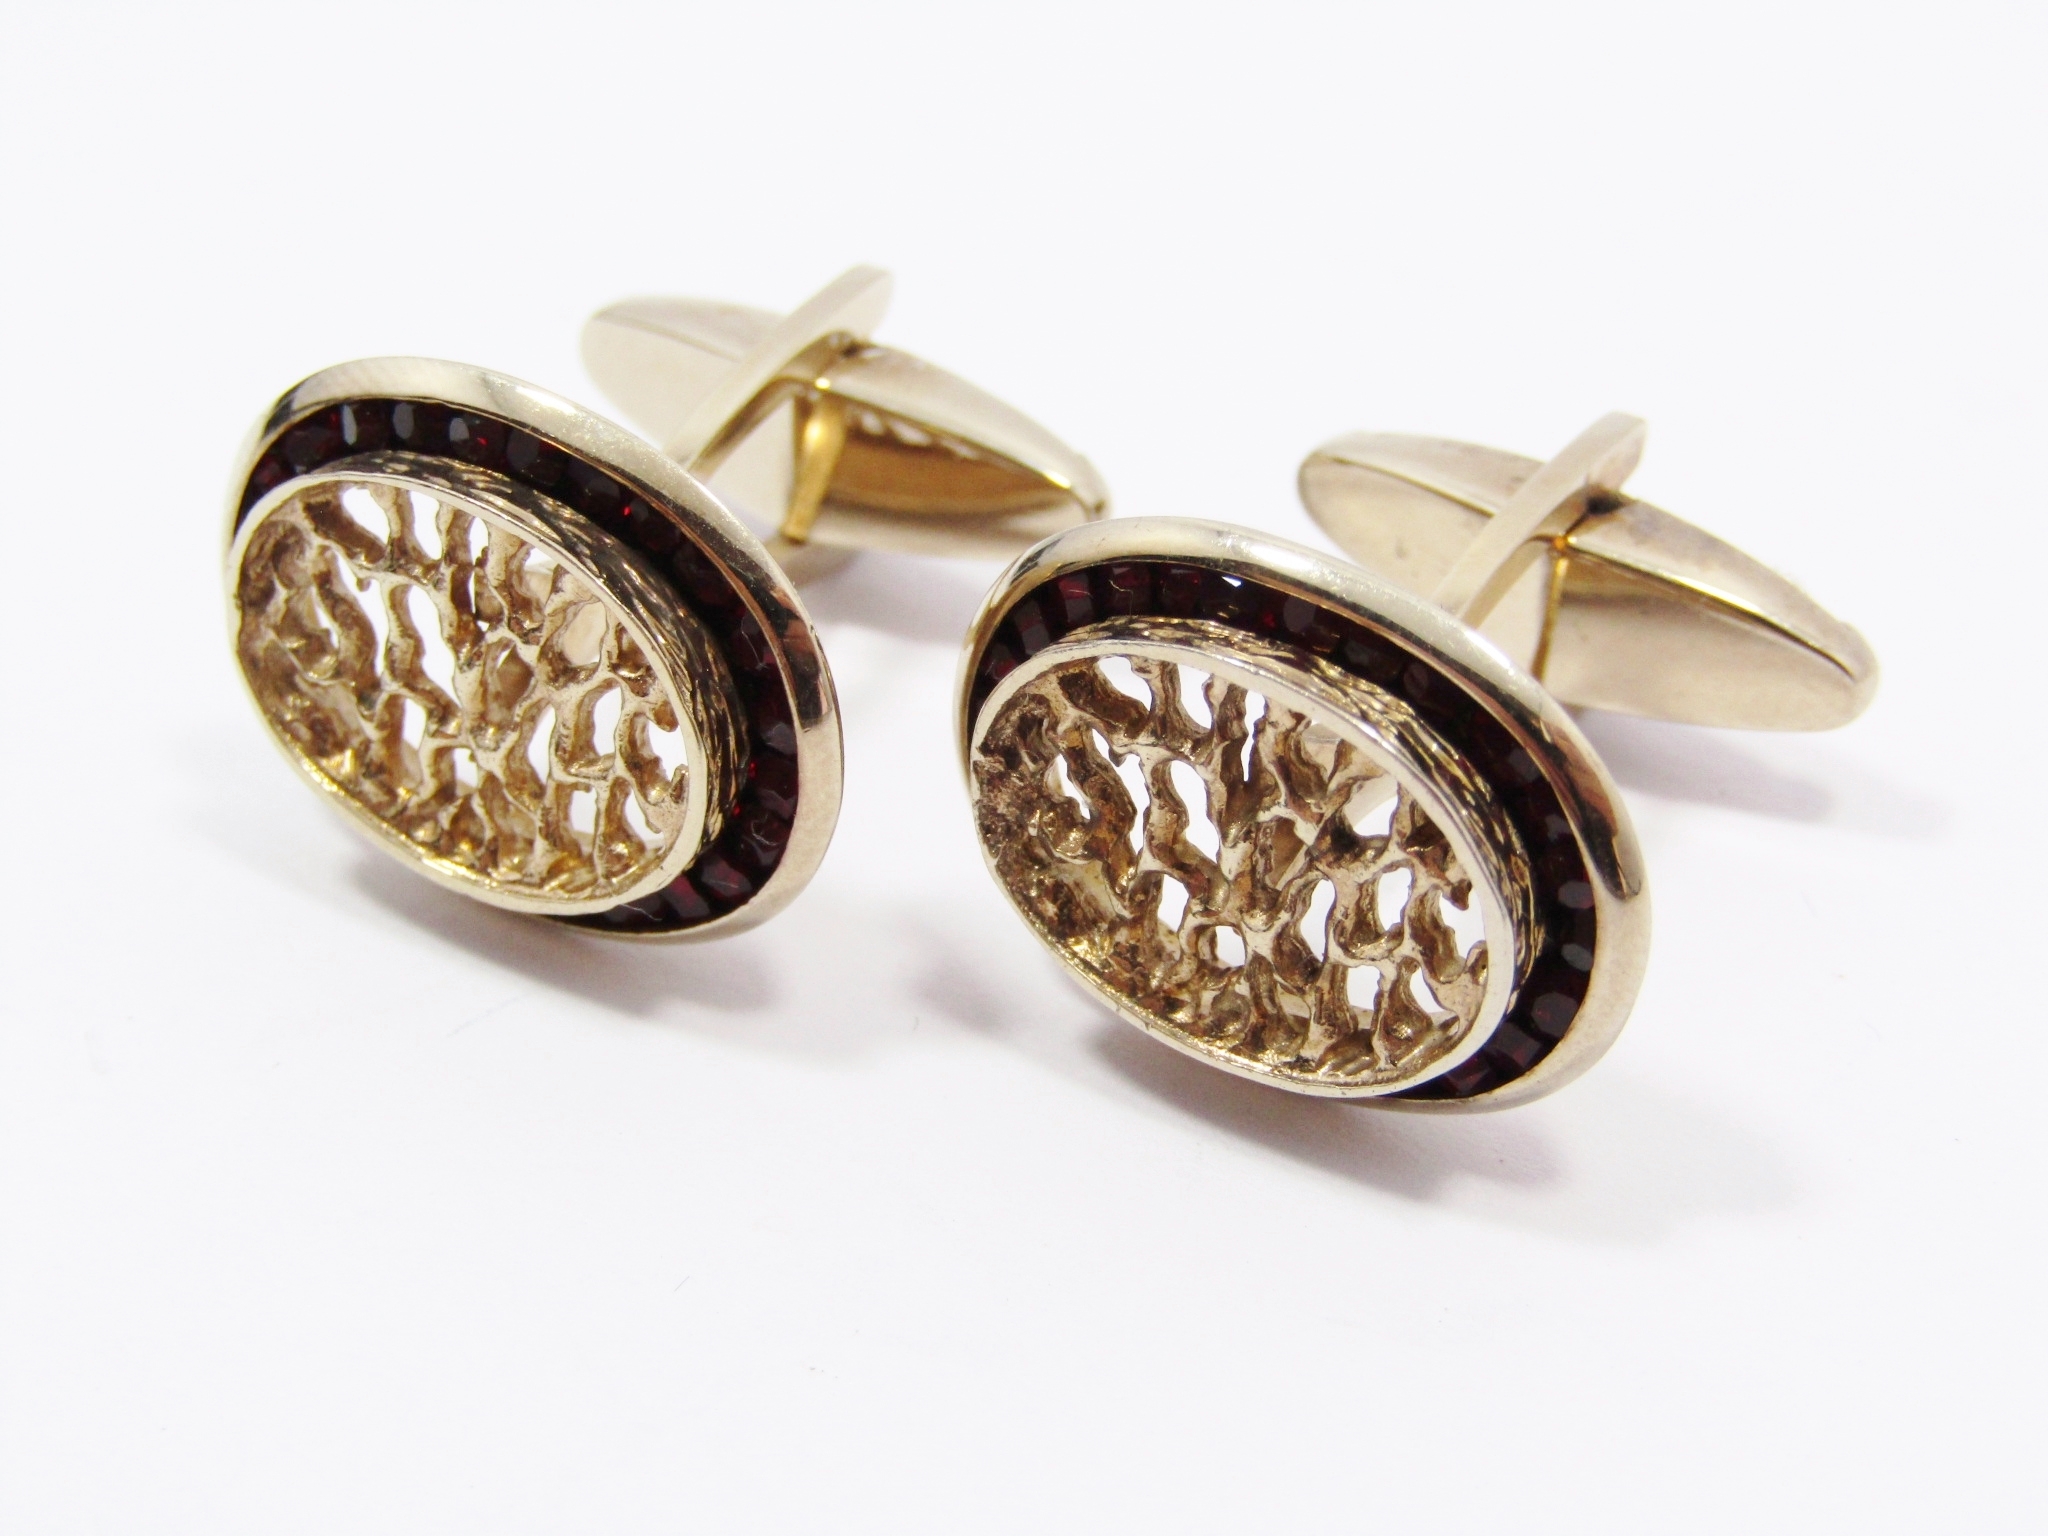 A Very Special Set Made up in Cuff links and a Tie Pin in Gold Gilt over Sterling Silver